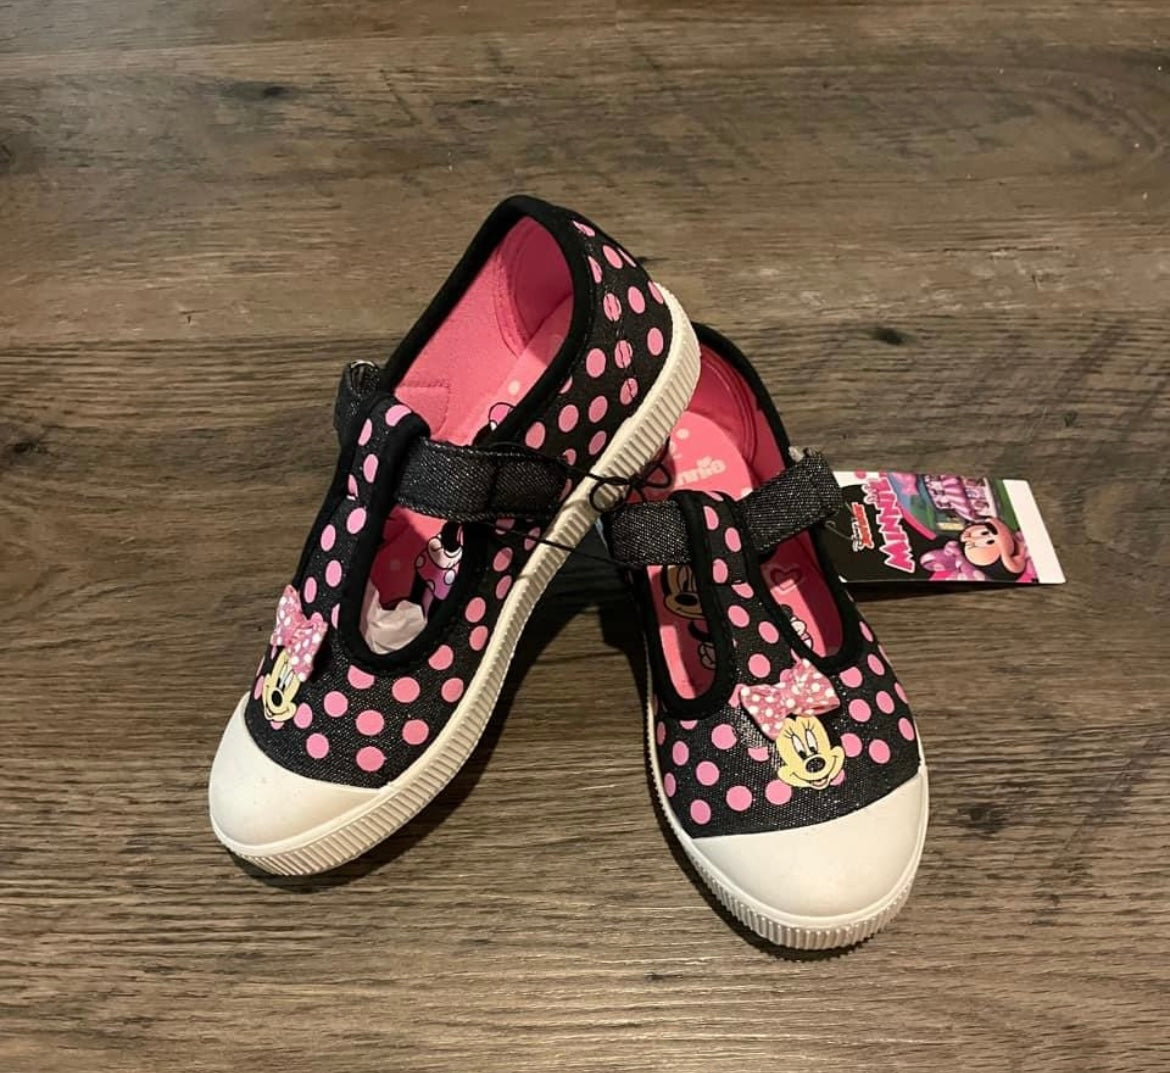 New toddler size 12 Disney minnie mouse shoes